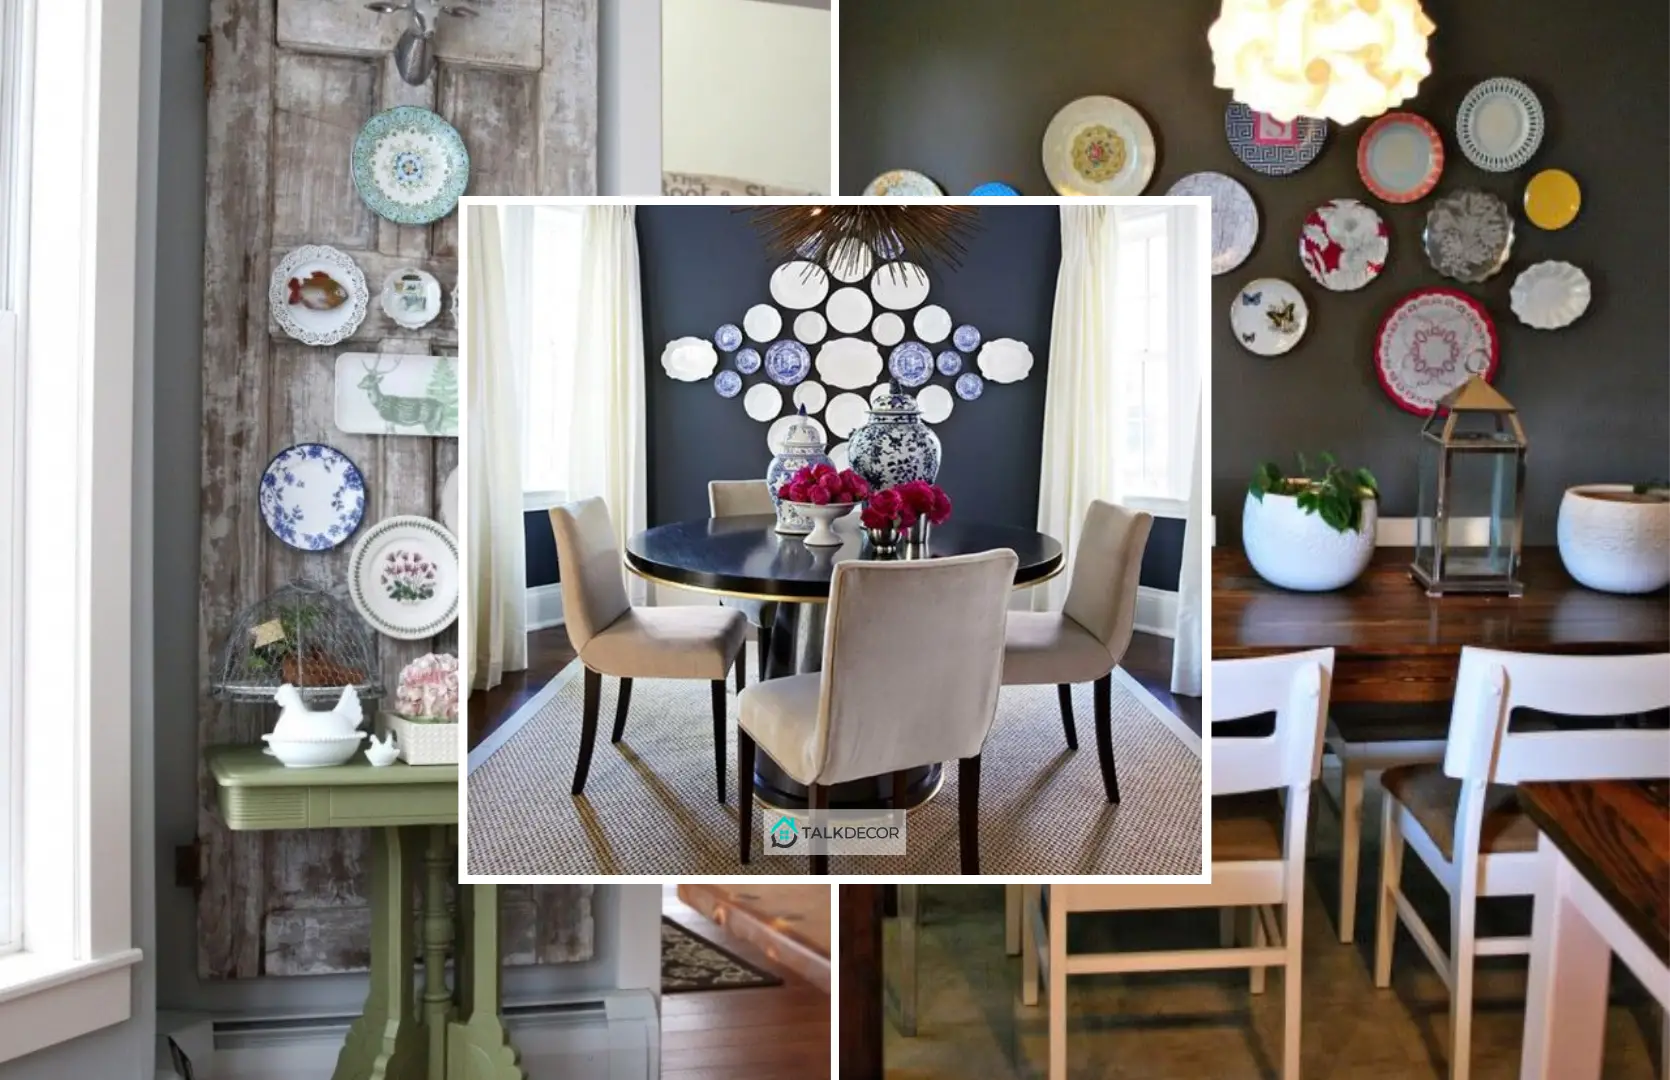 How to Do the Plate Wall Decorations